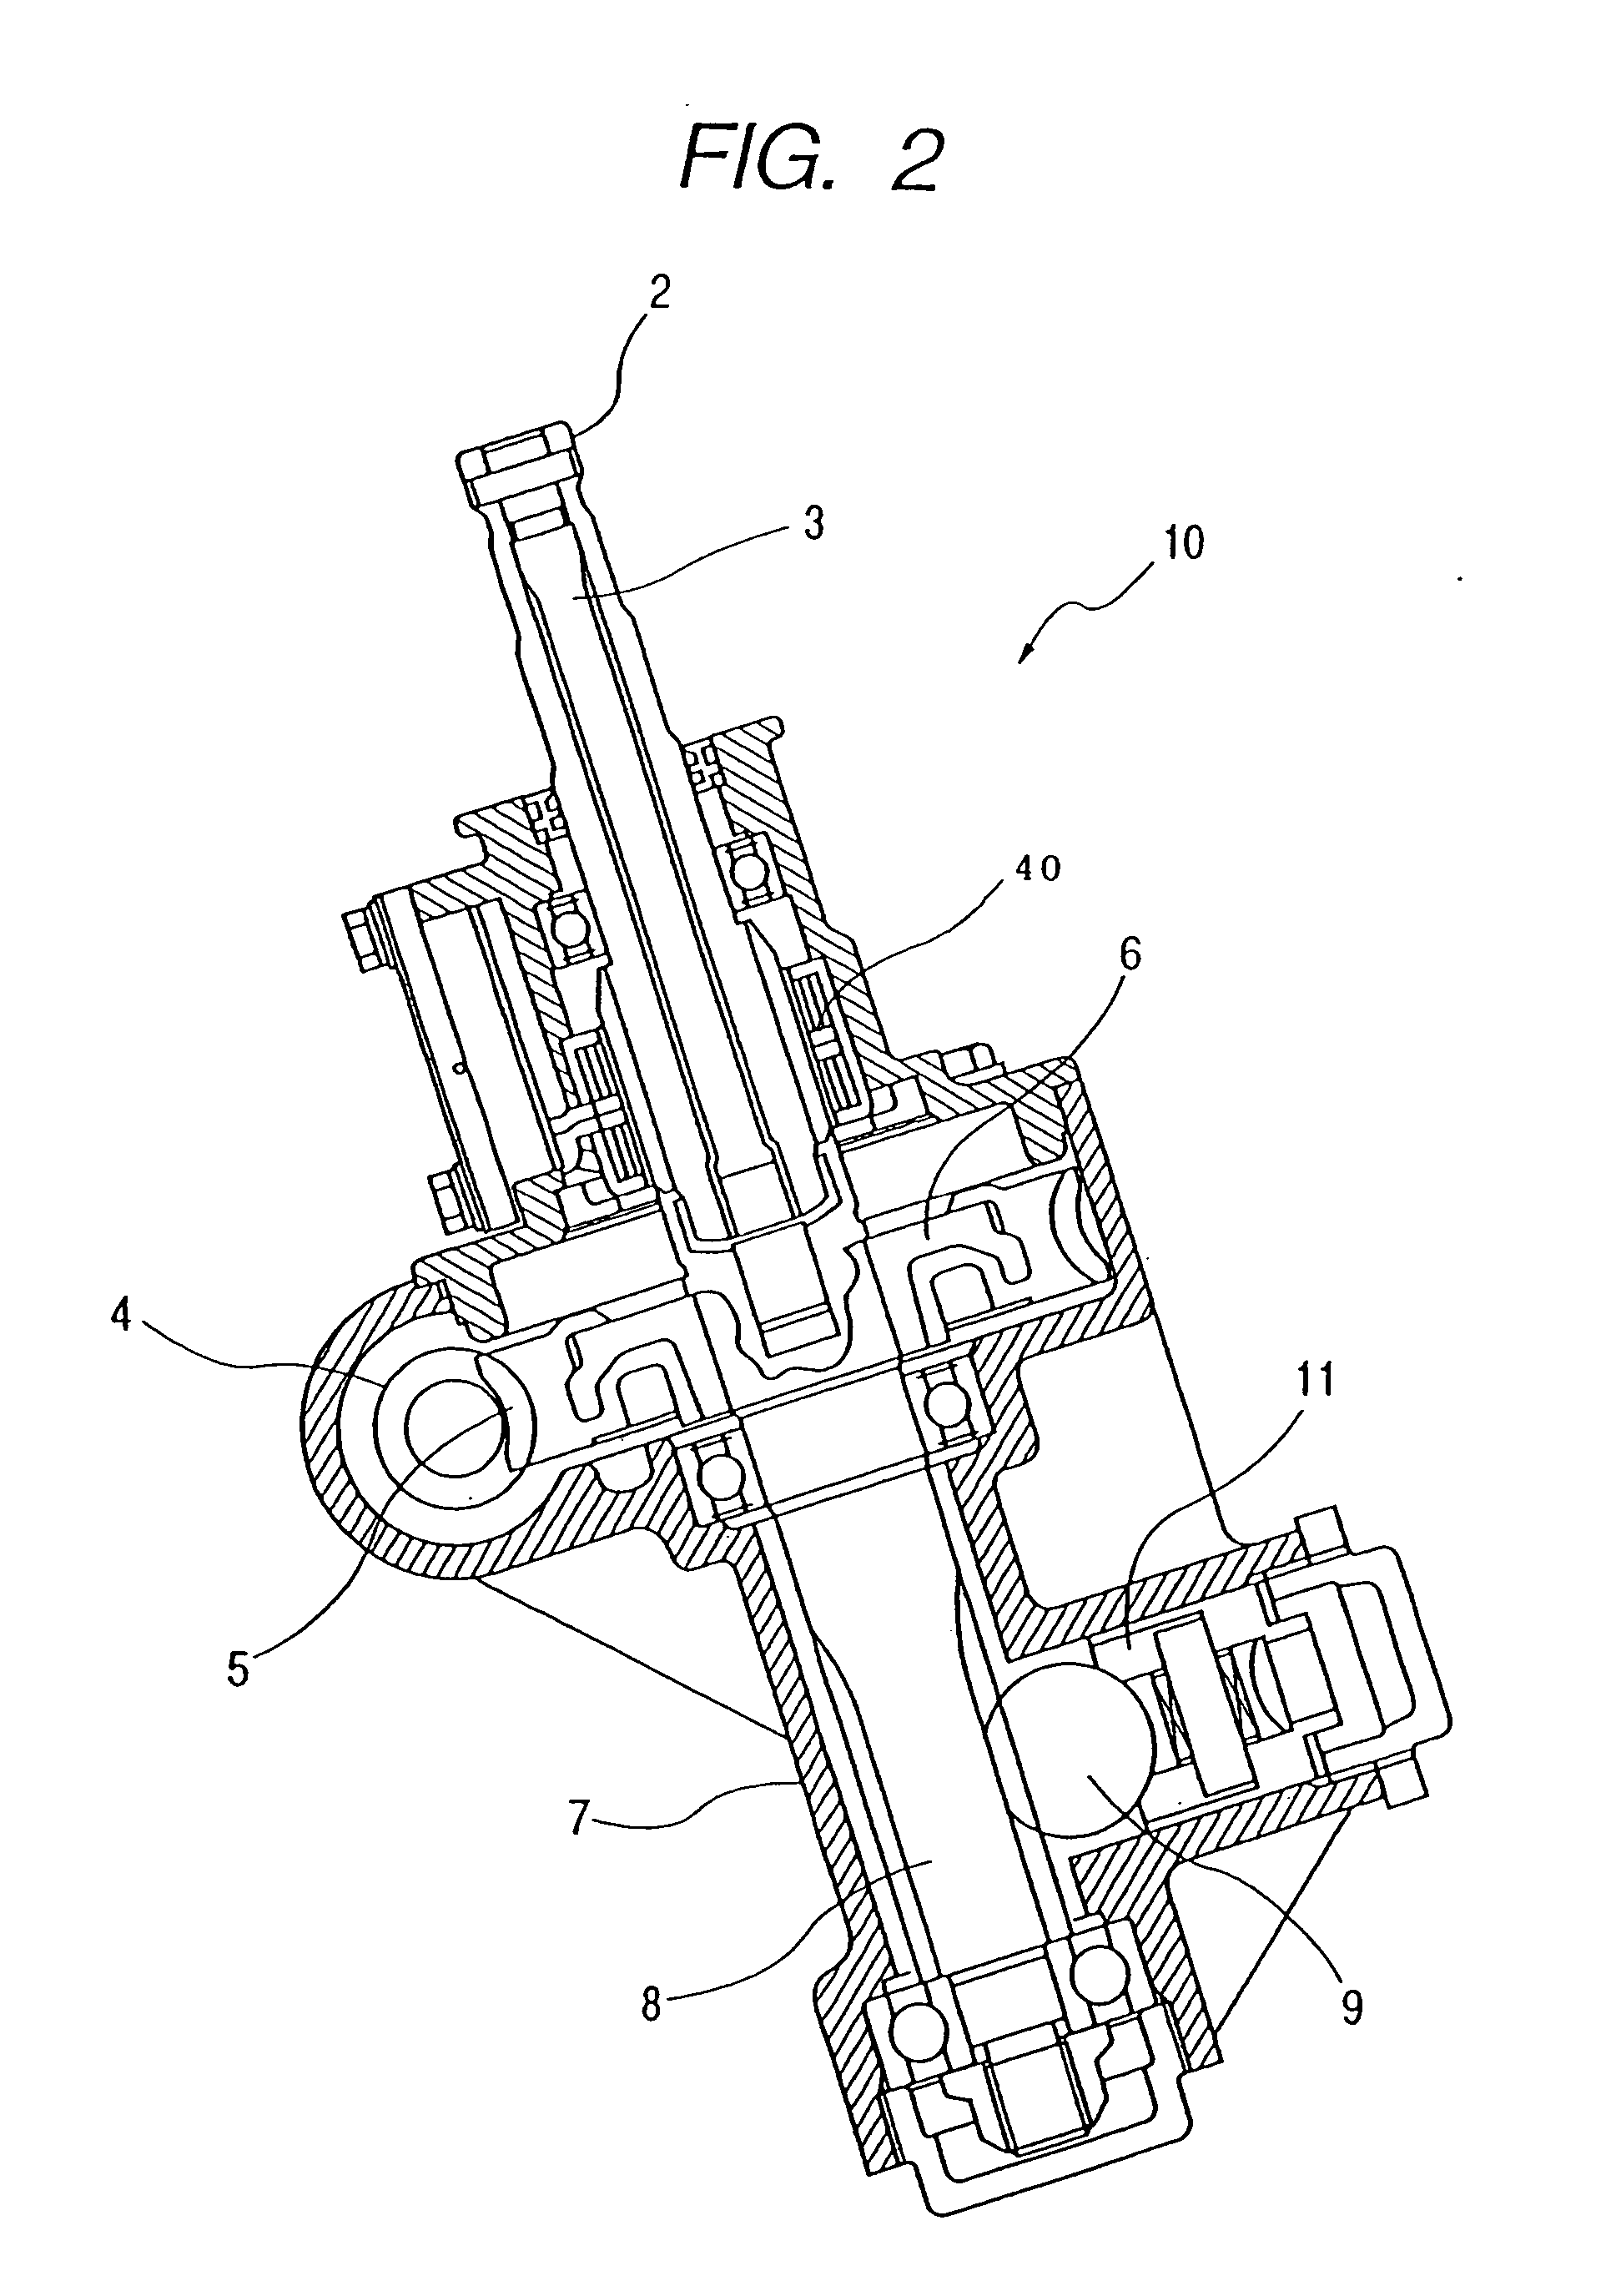 Reduction gear and method and apparatus for manufacturing the reduction gear concerned, and electric power steering system with the reduction gear concerned